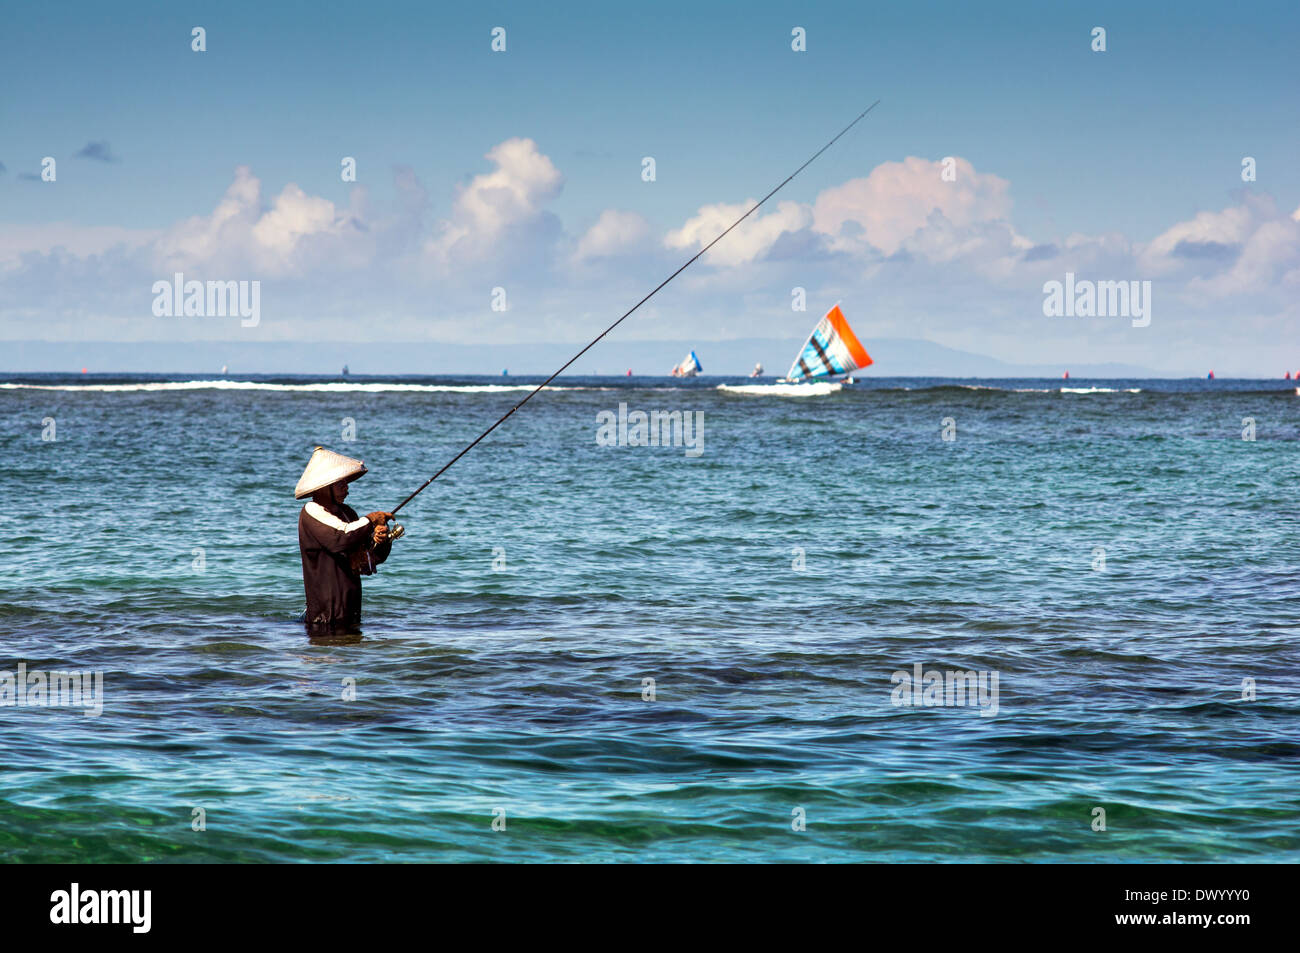 https://c8.alamy.com/comp/DWYYY0/local-fisherman-standing-in-the-sea-holding-a-fishing-rod-to-catch-DWYYY0.jpg